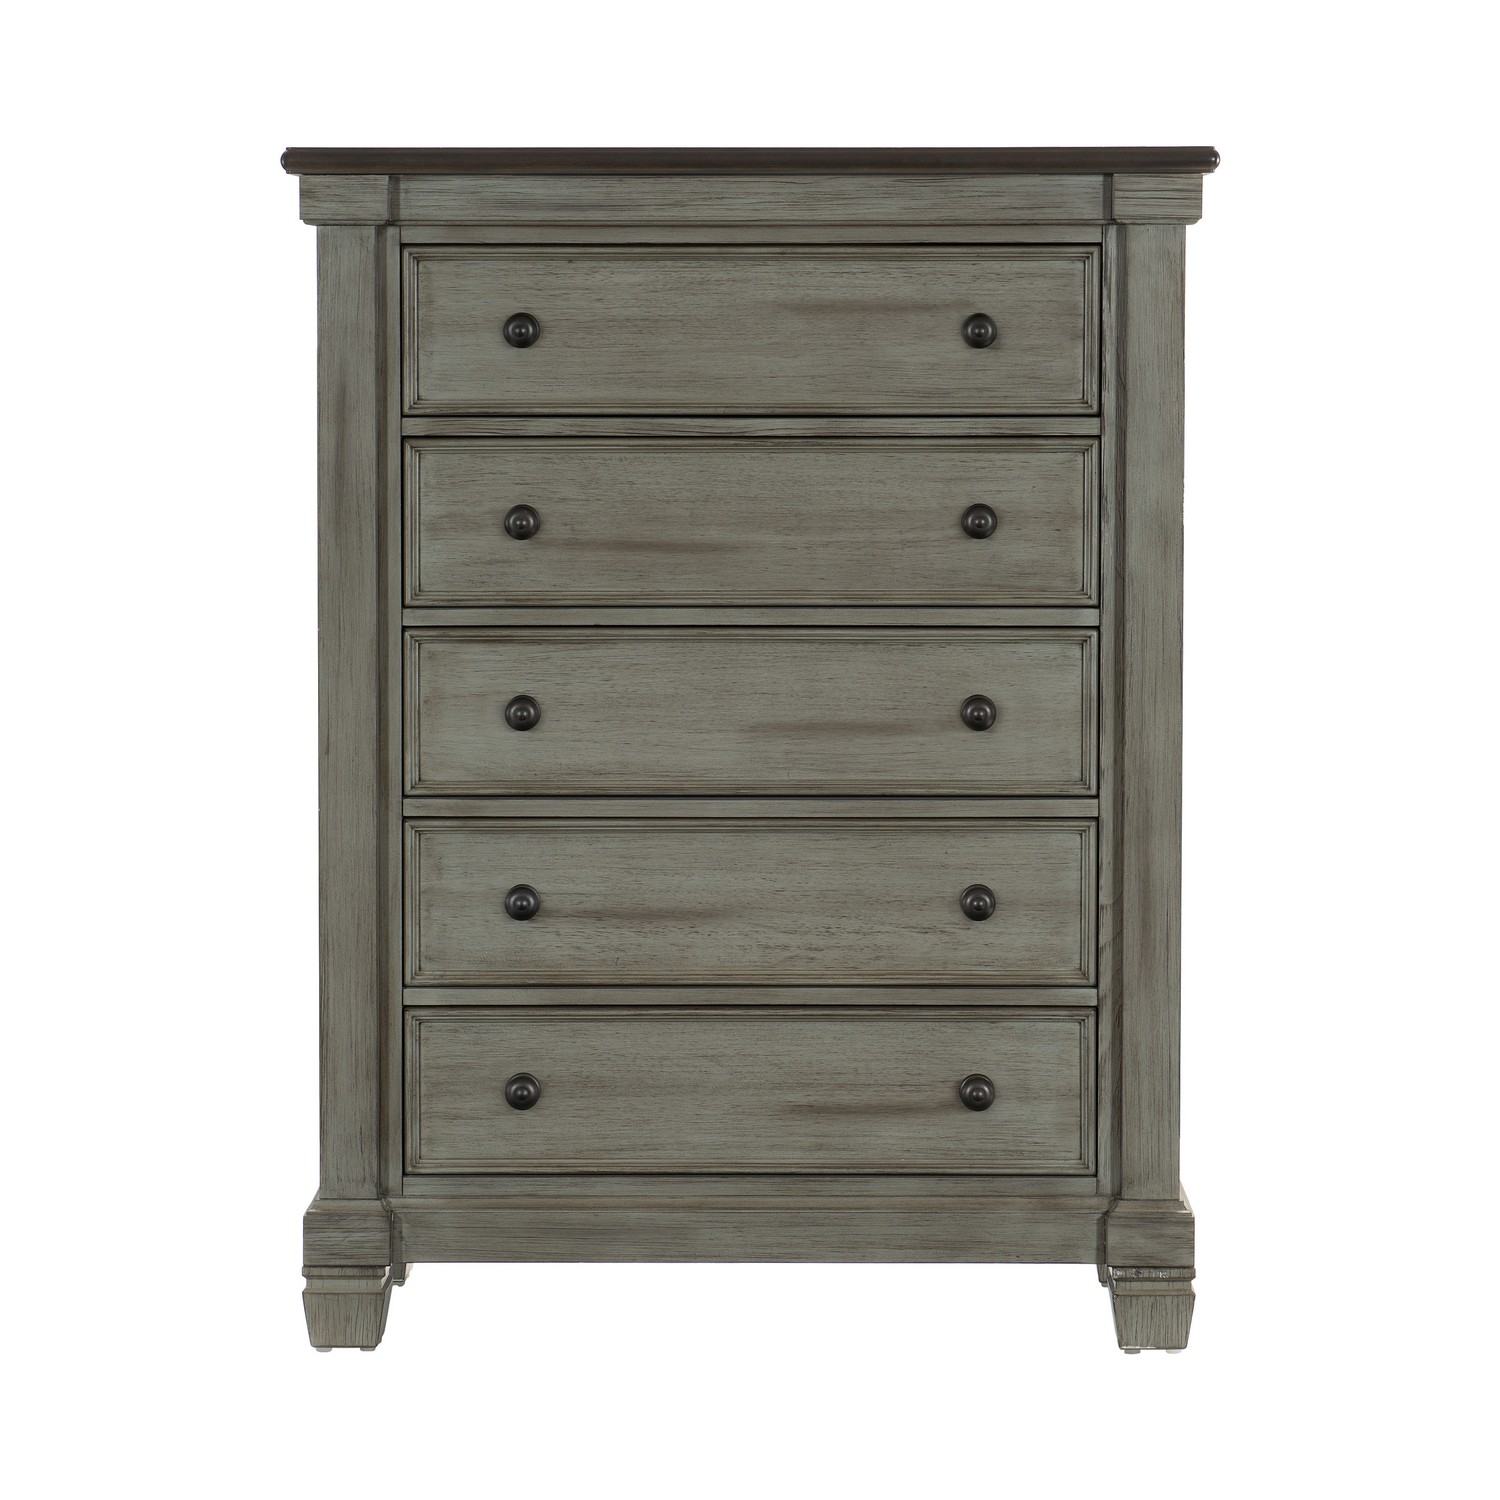 Homelegance Weaver Chest - Two-tone : Antique Gray And Coffee